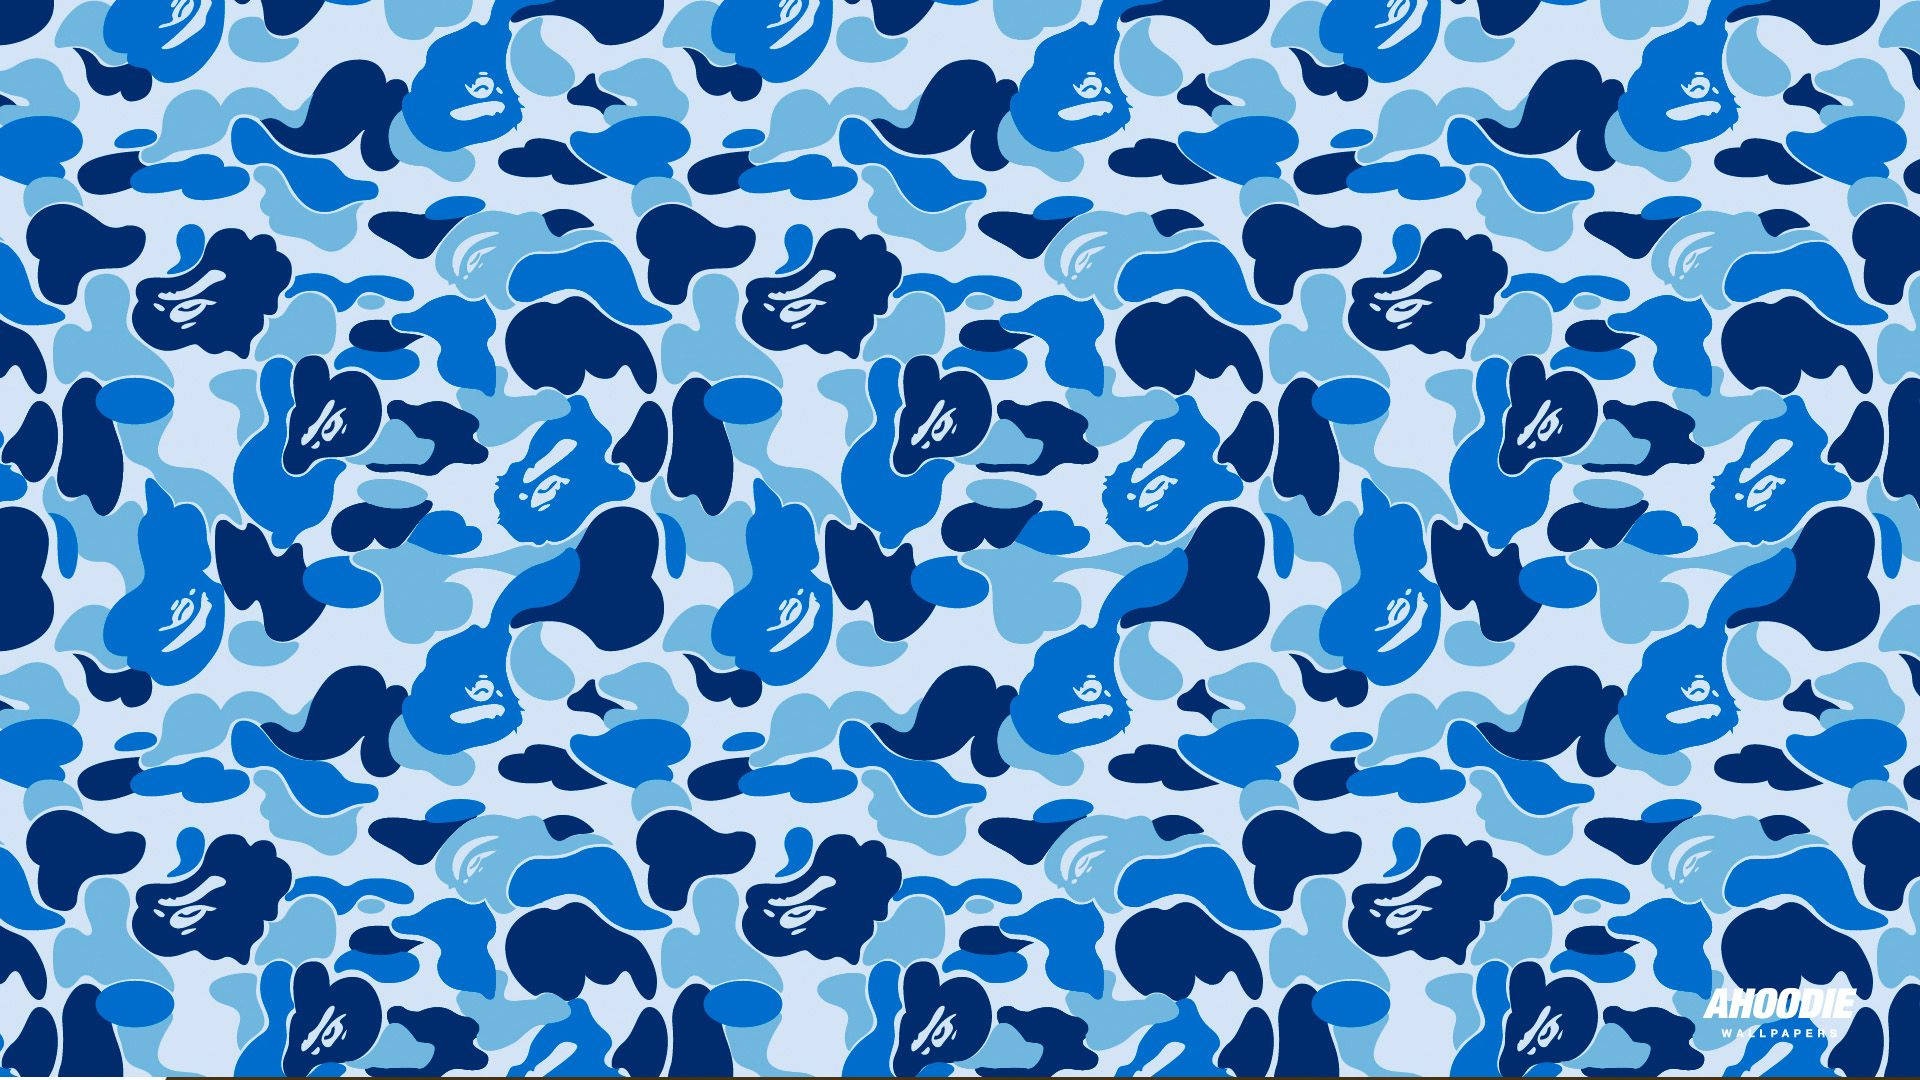 Up to date with BAPE's classic blue camo design Wallpaper